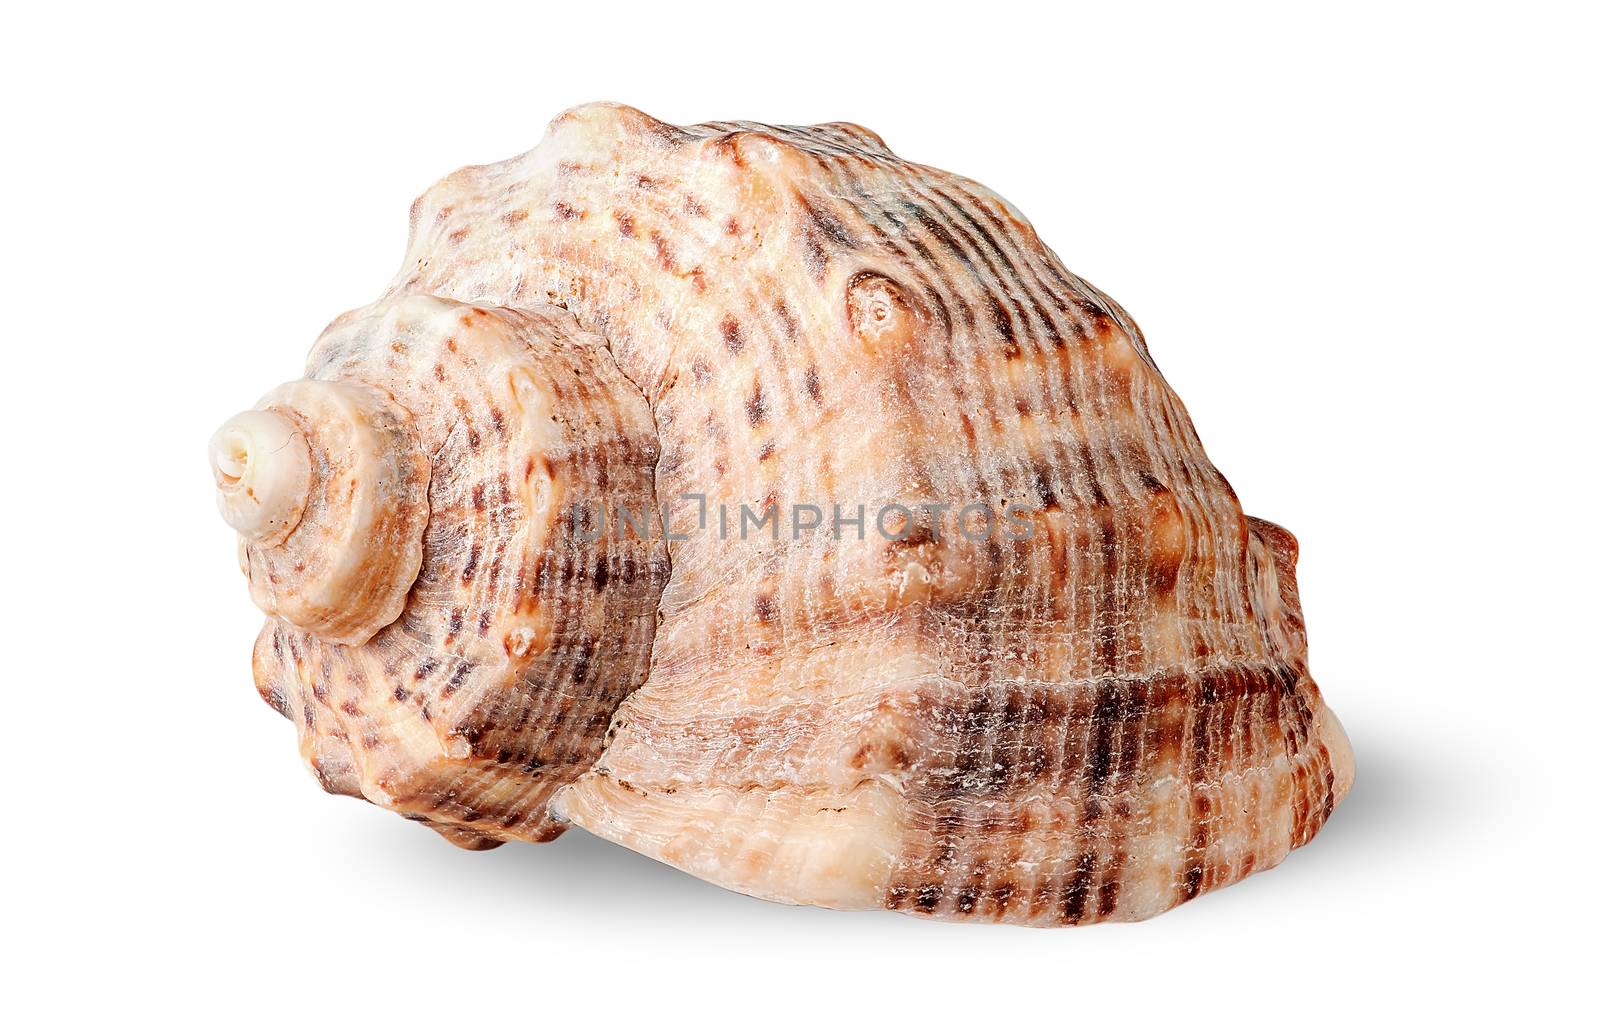 Seashell rapana side view rotated isolated on white background